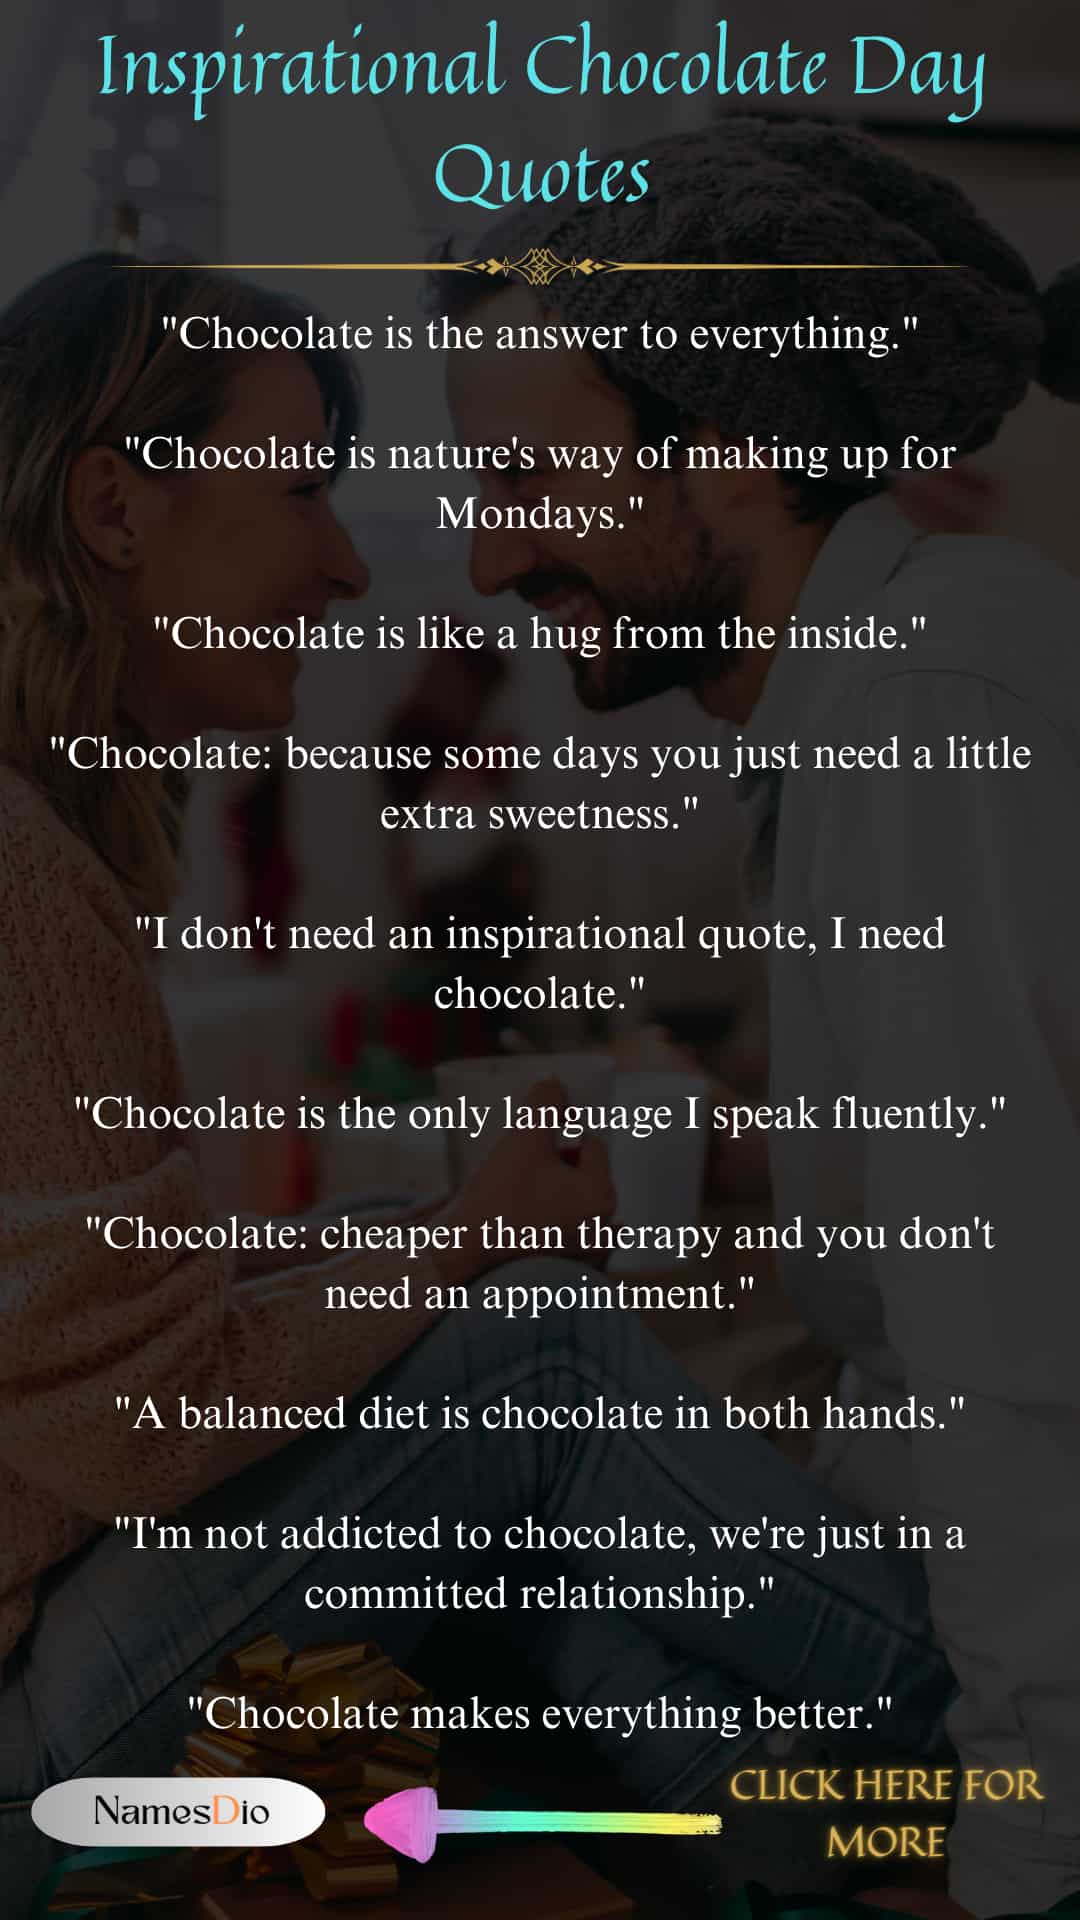 Inspirational-Chocolate-Day-Quotes